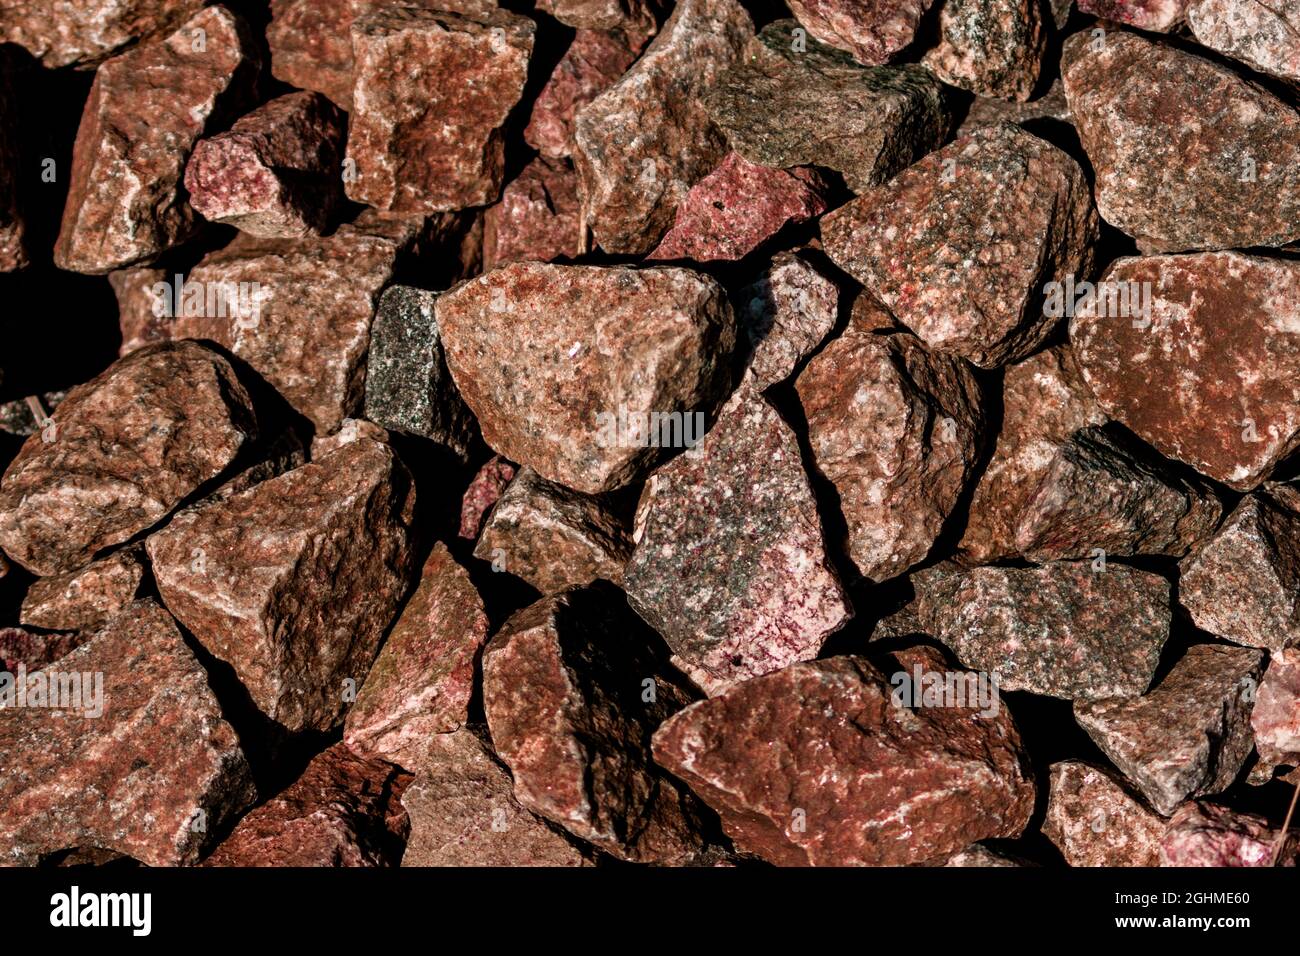 There are many brown and orange colored granite stones. Stone texture. Stock Photo